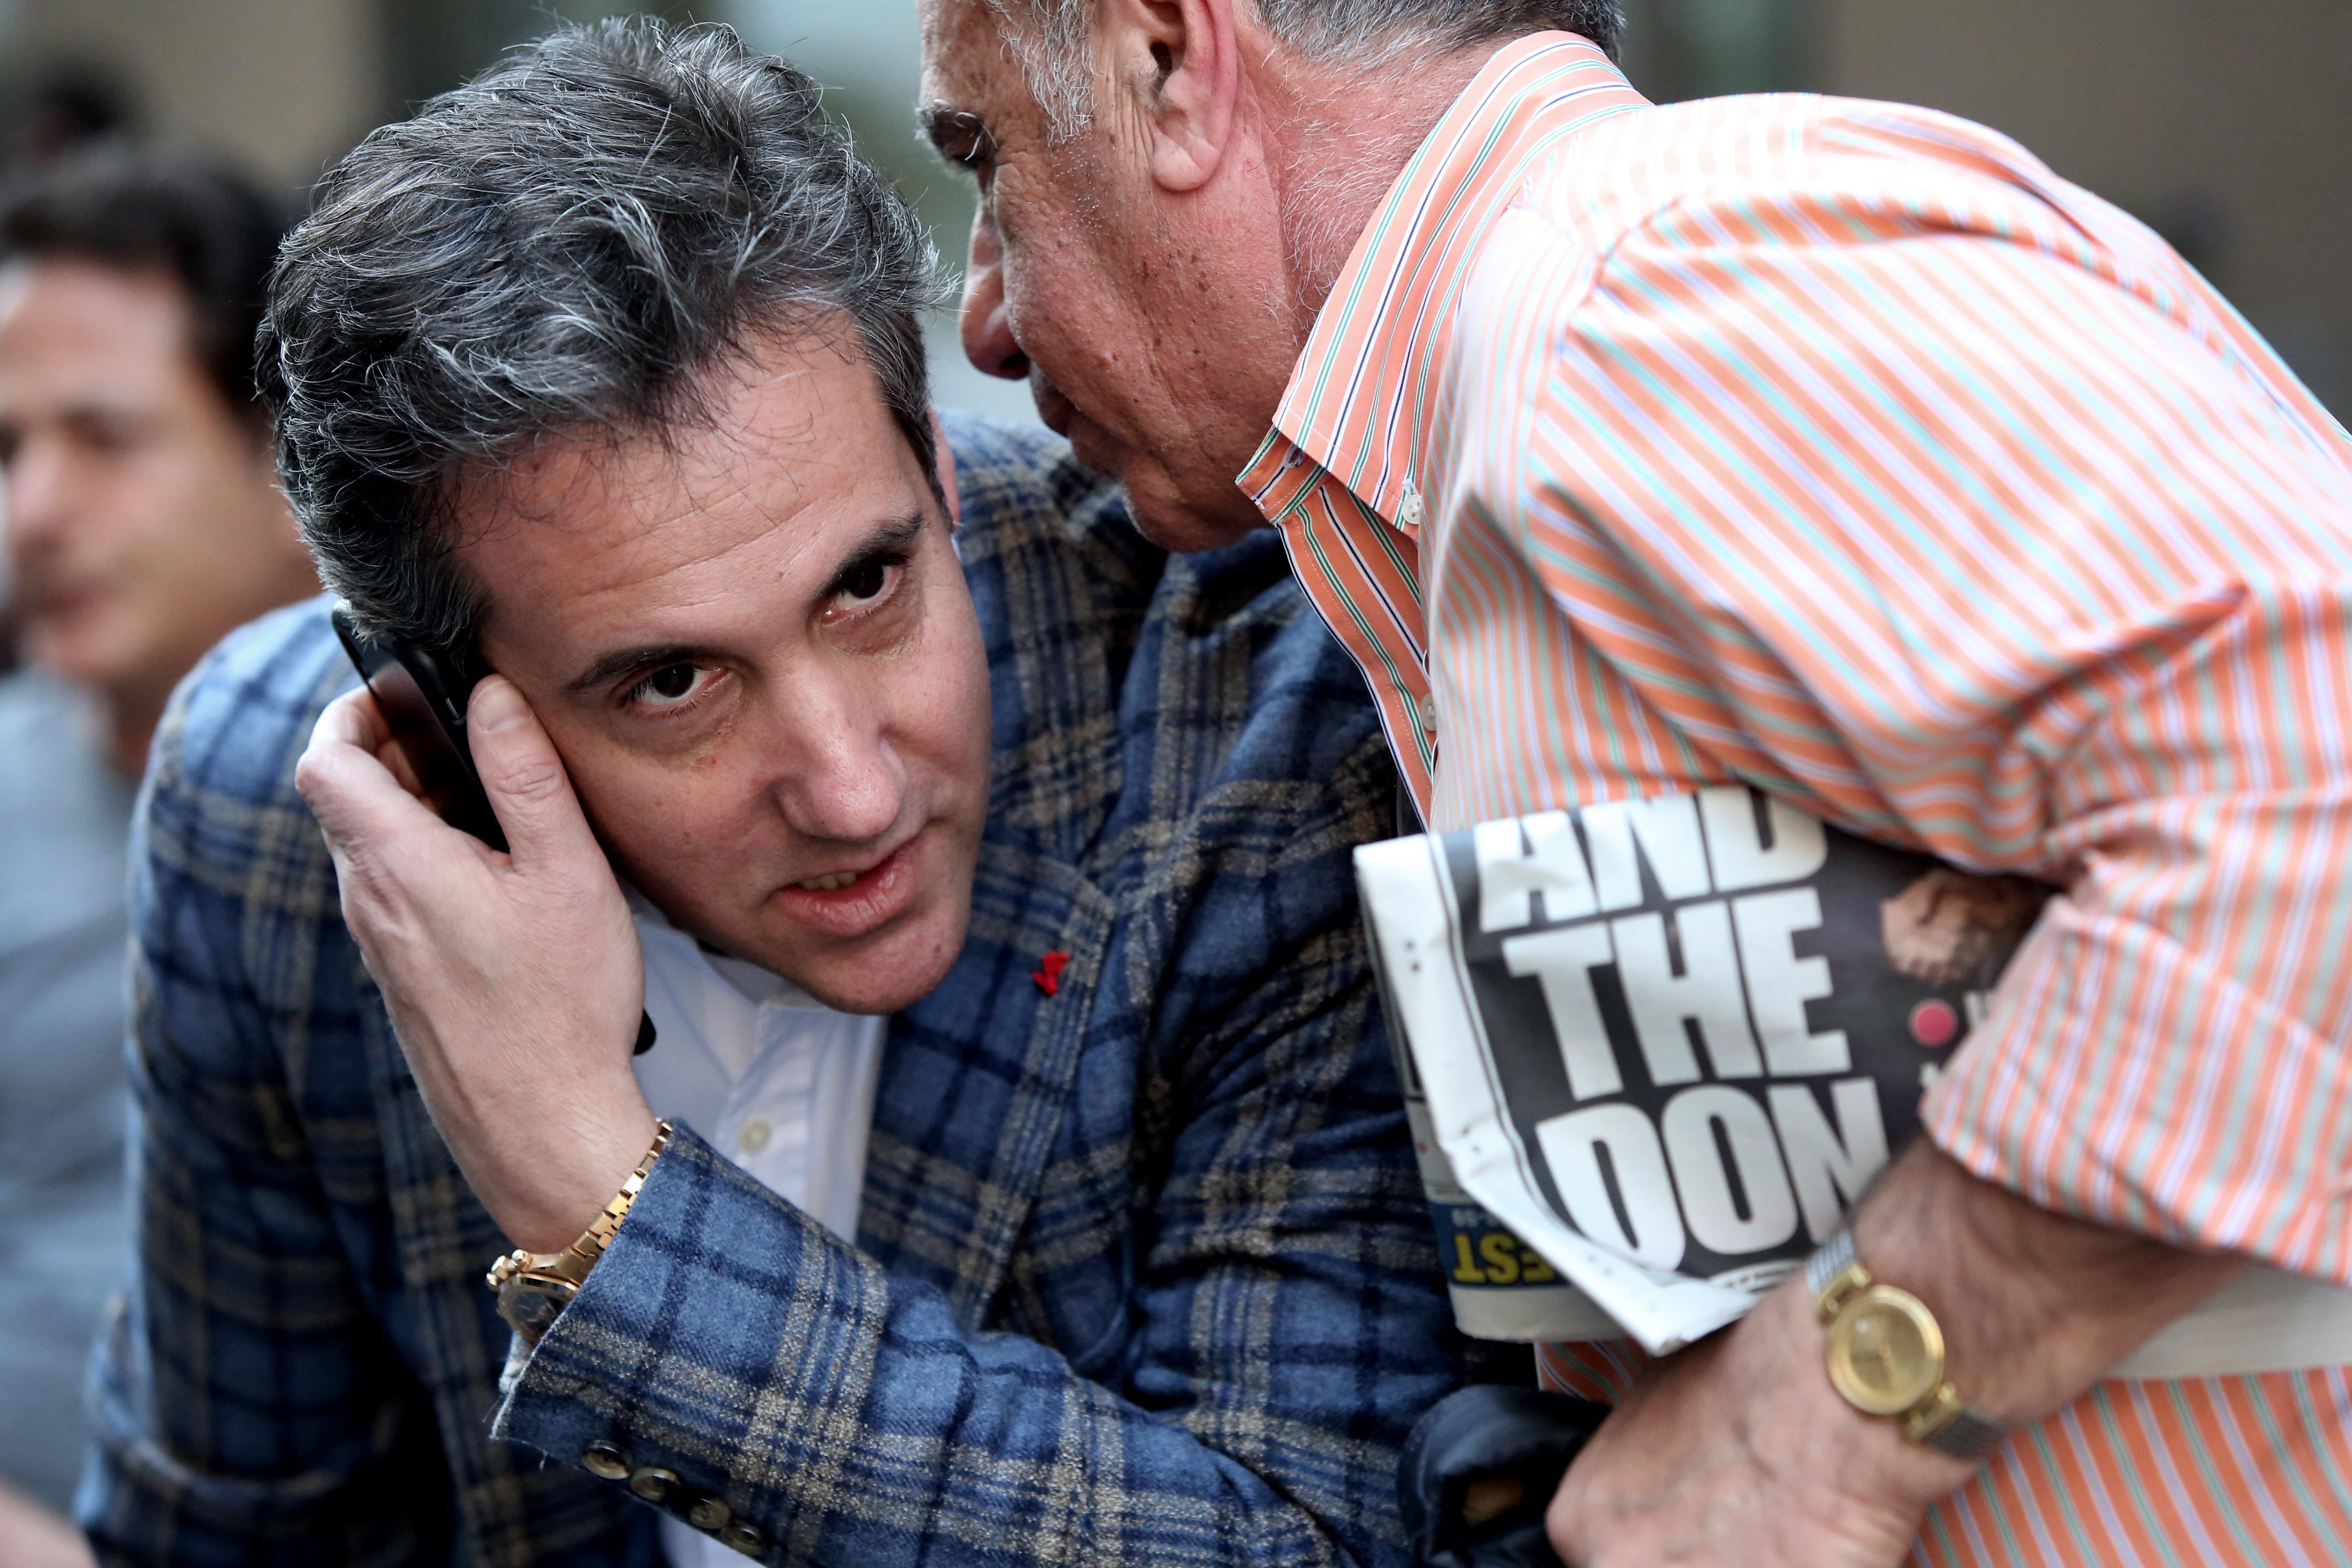 Michael Cohen takes a phone call as he sits outside near the Loews Regency hotel on Park Ave on April 13, 2018 in New York City.